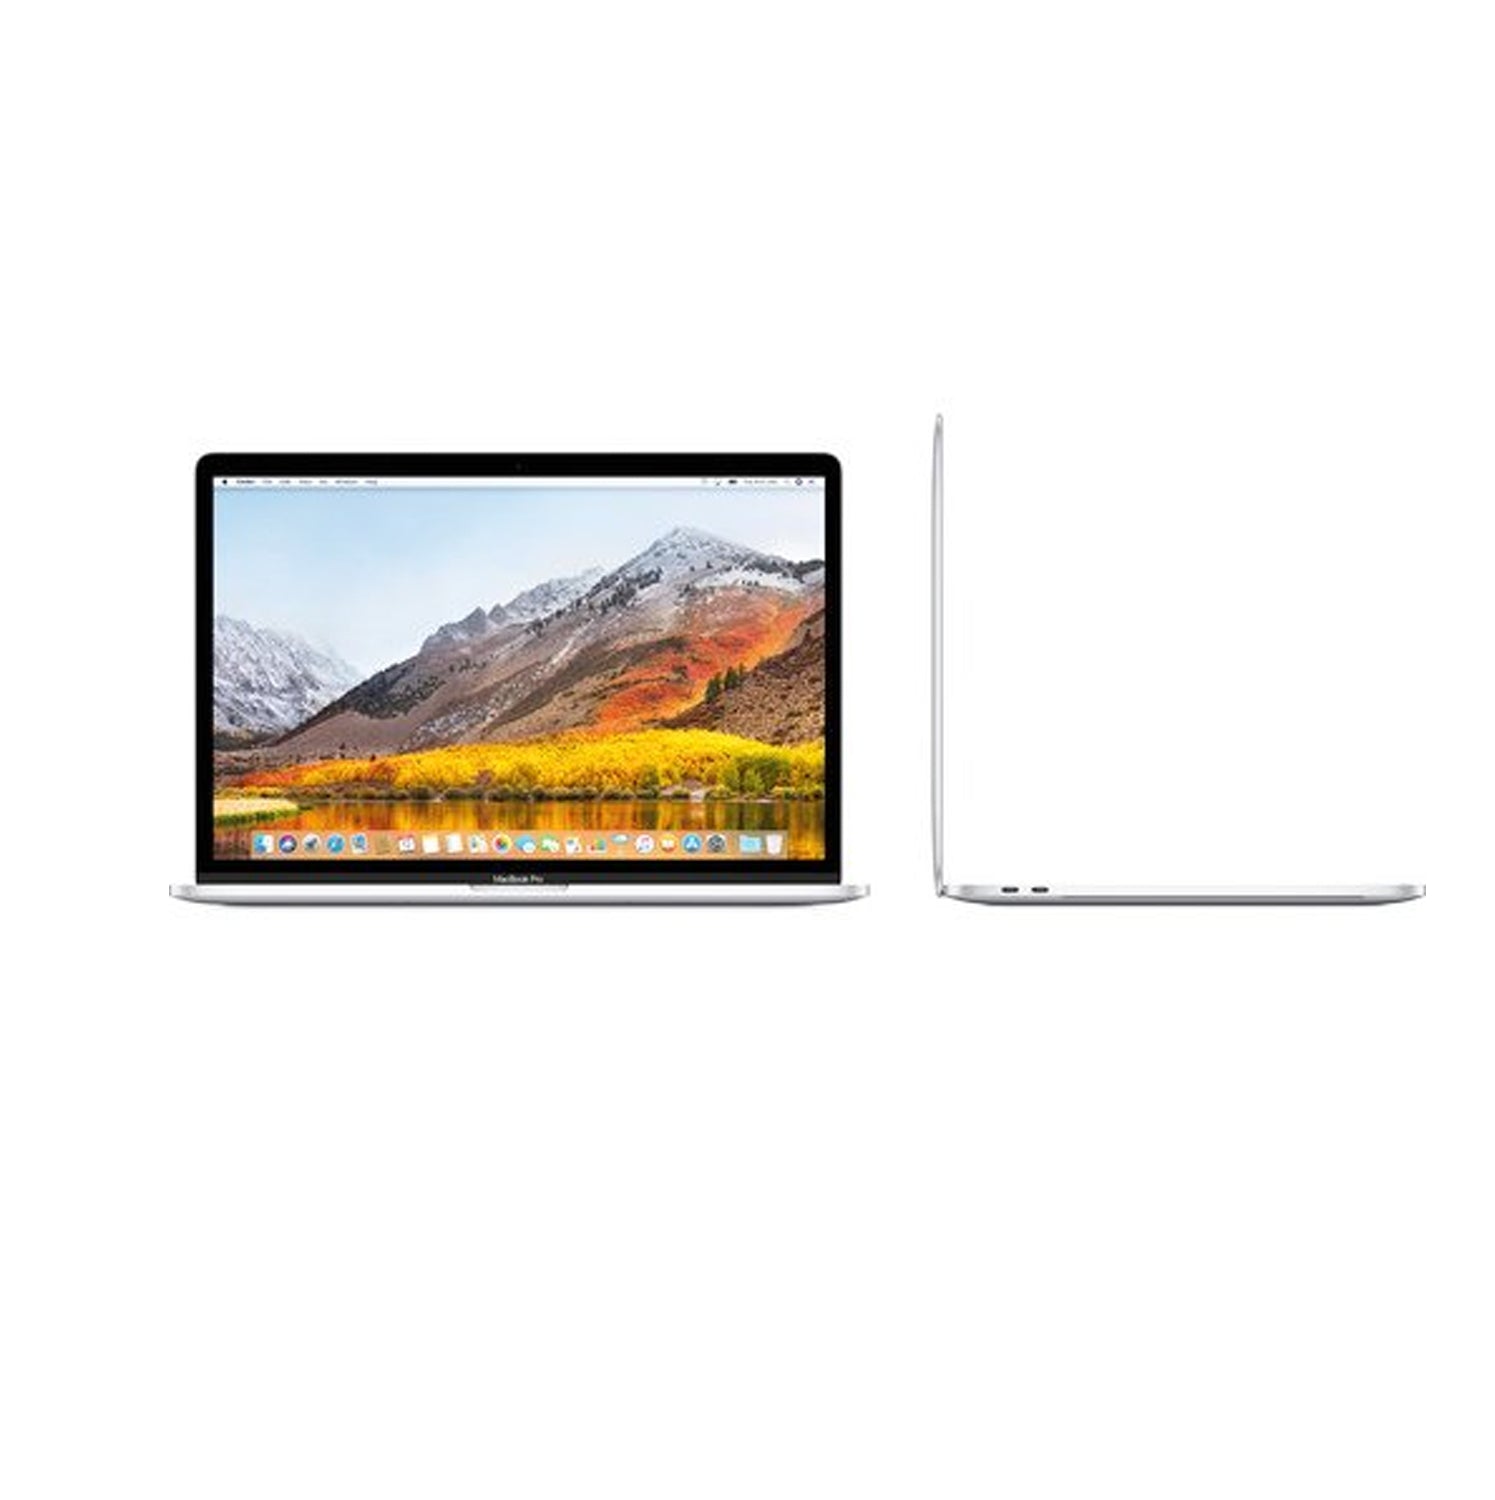 Apple MacBook Pro 15-inch with Touch Bar 256GB - Silver (Spanish Keyboard) MR962E/A with Apple AirPods Pro